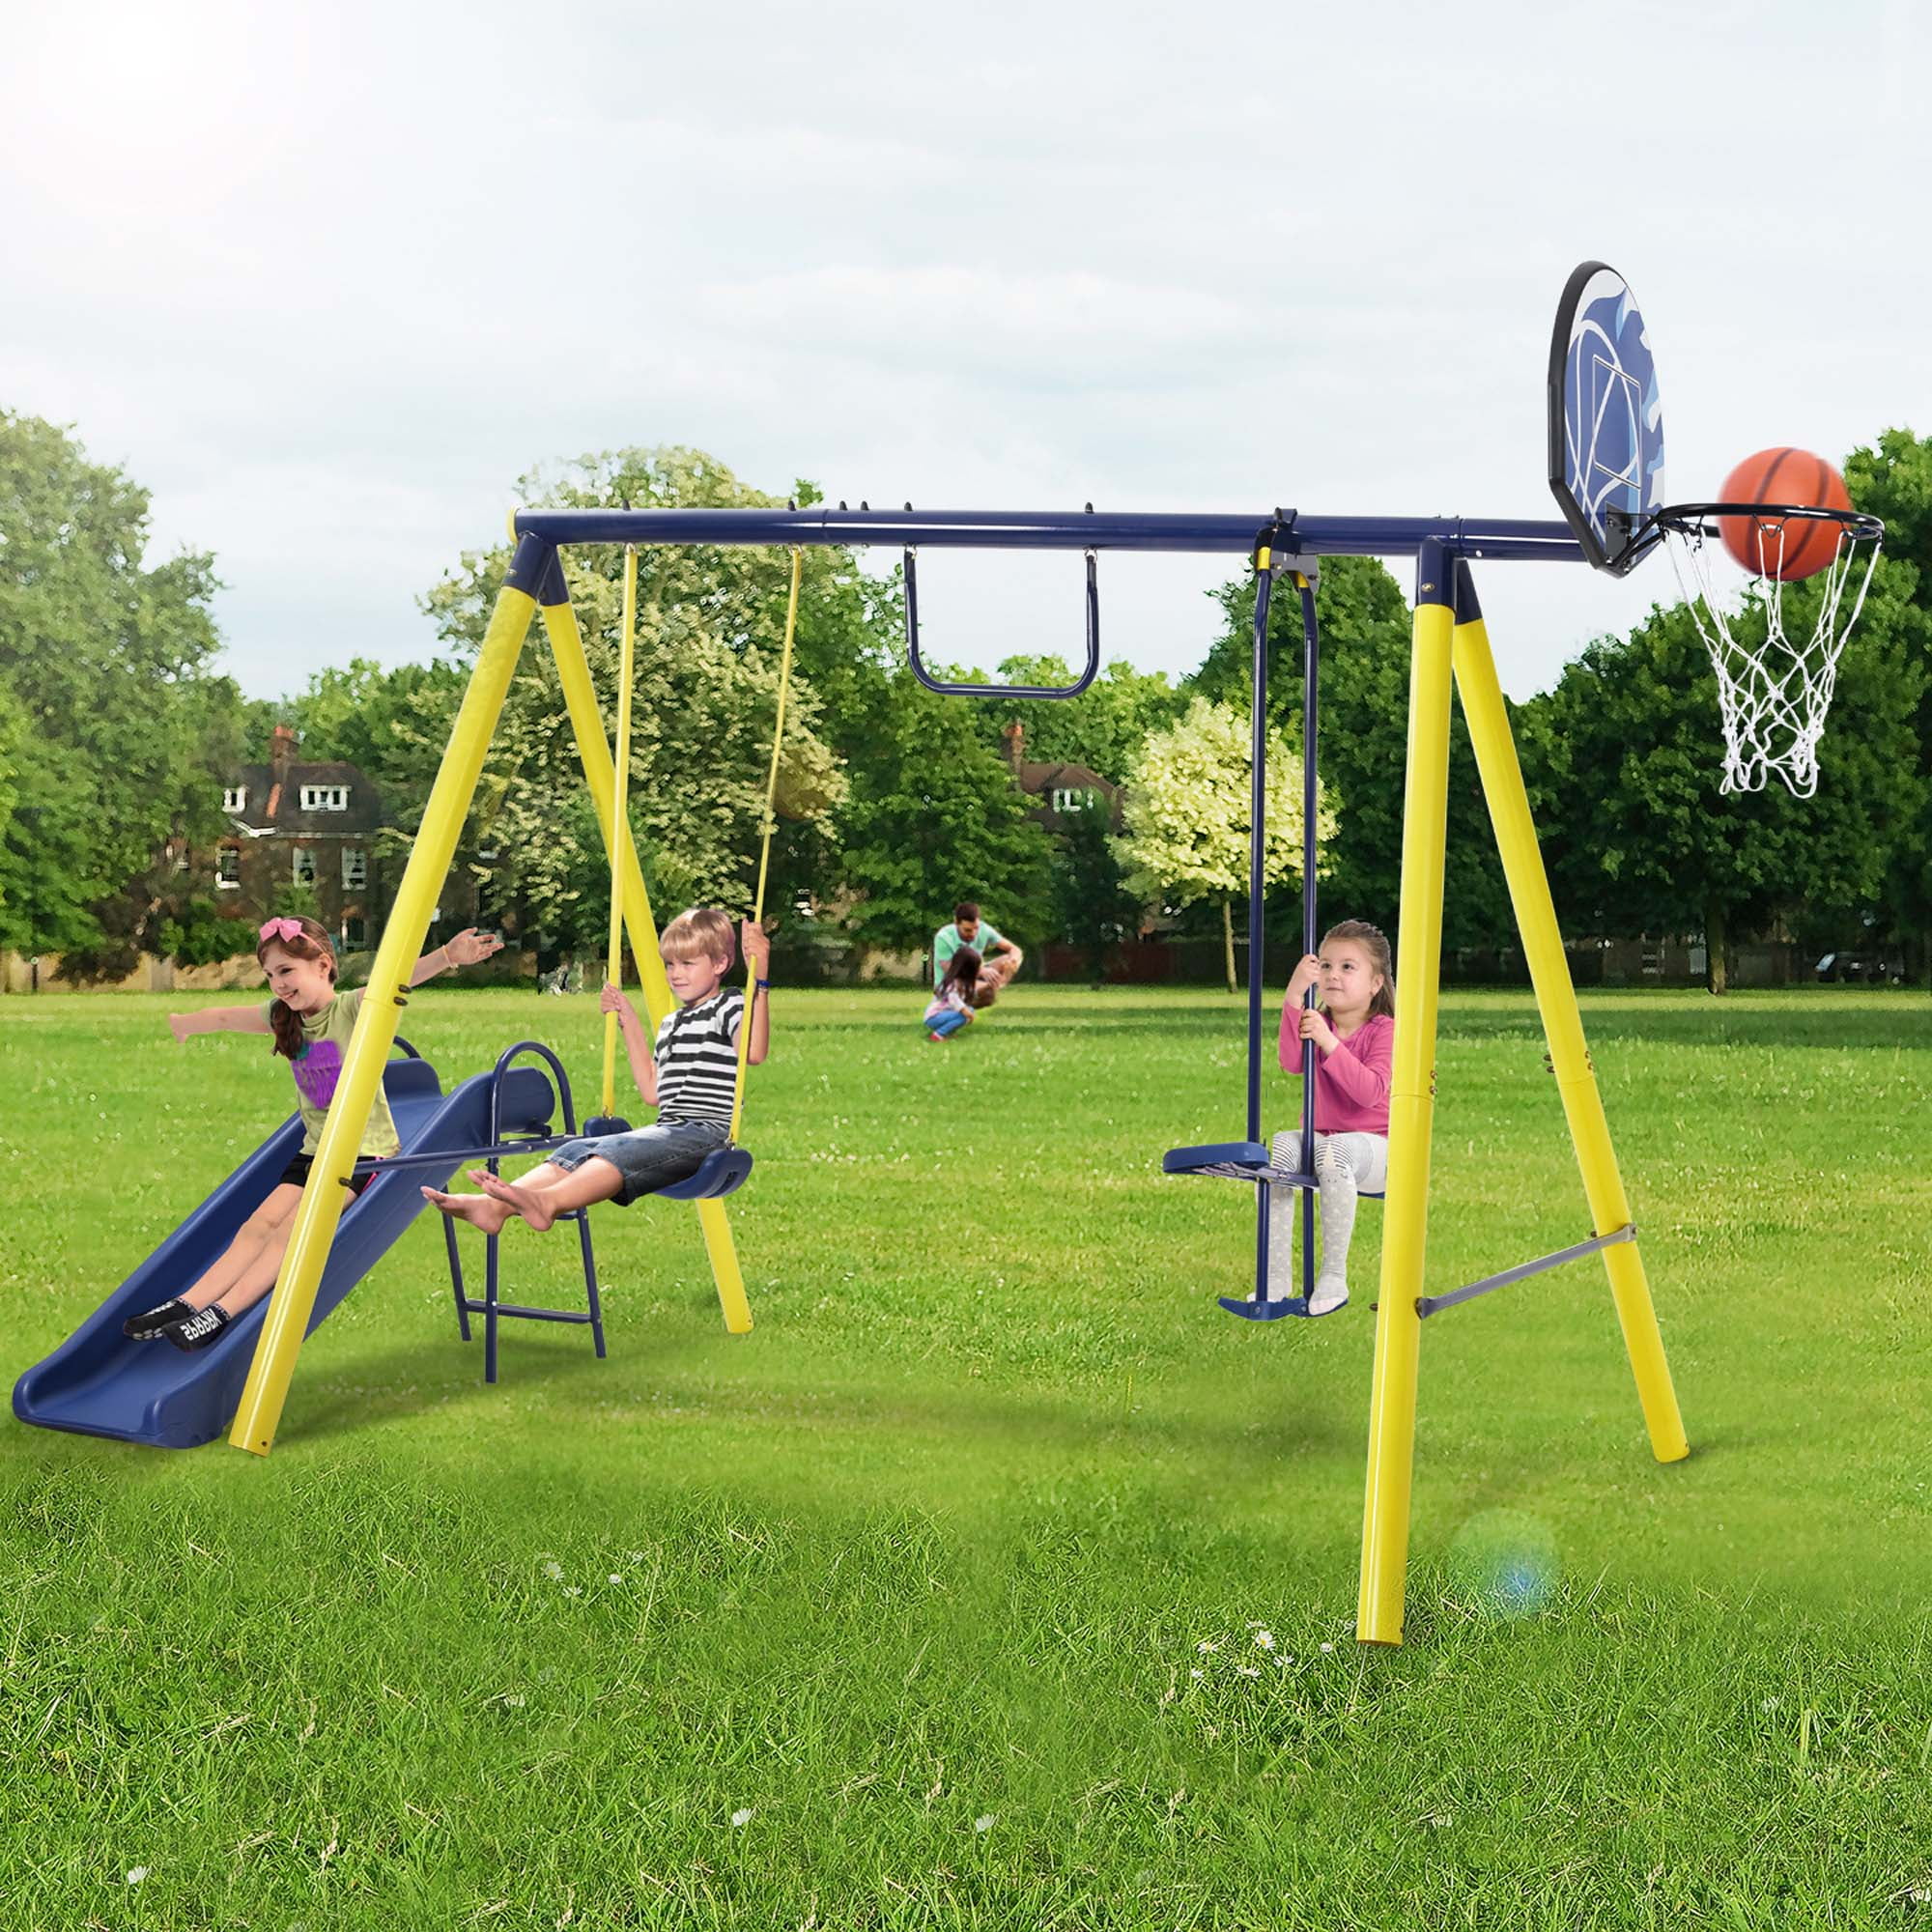 5 in 1 Fun Swing Set Kids Playground Slide Outdoor Backyardspace Saver Play T1 for sale online 